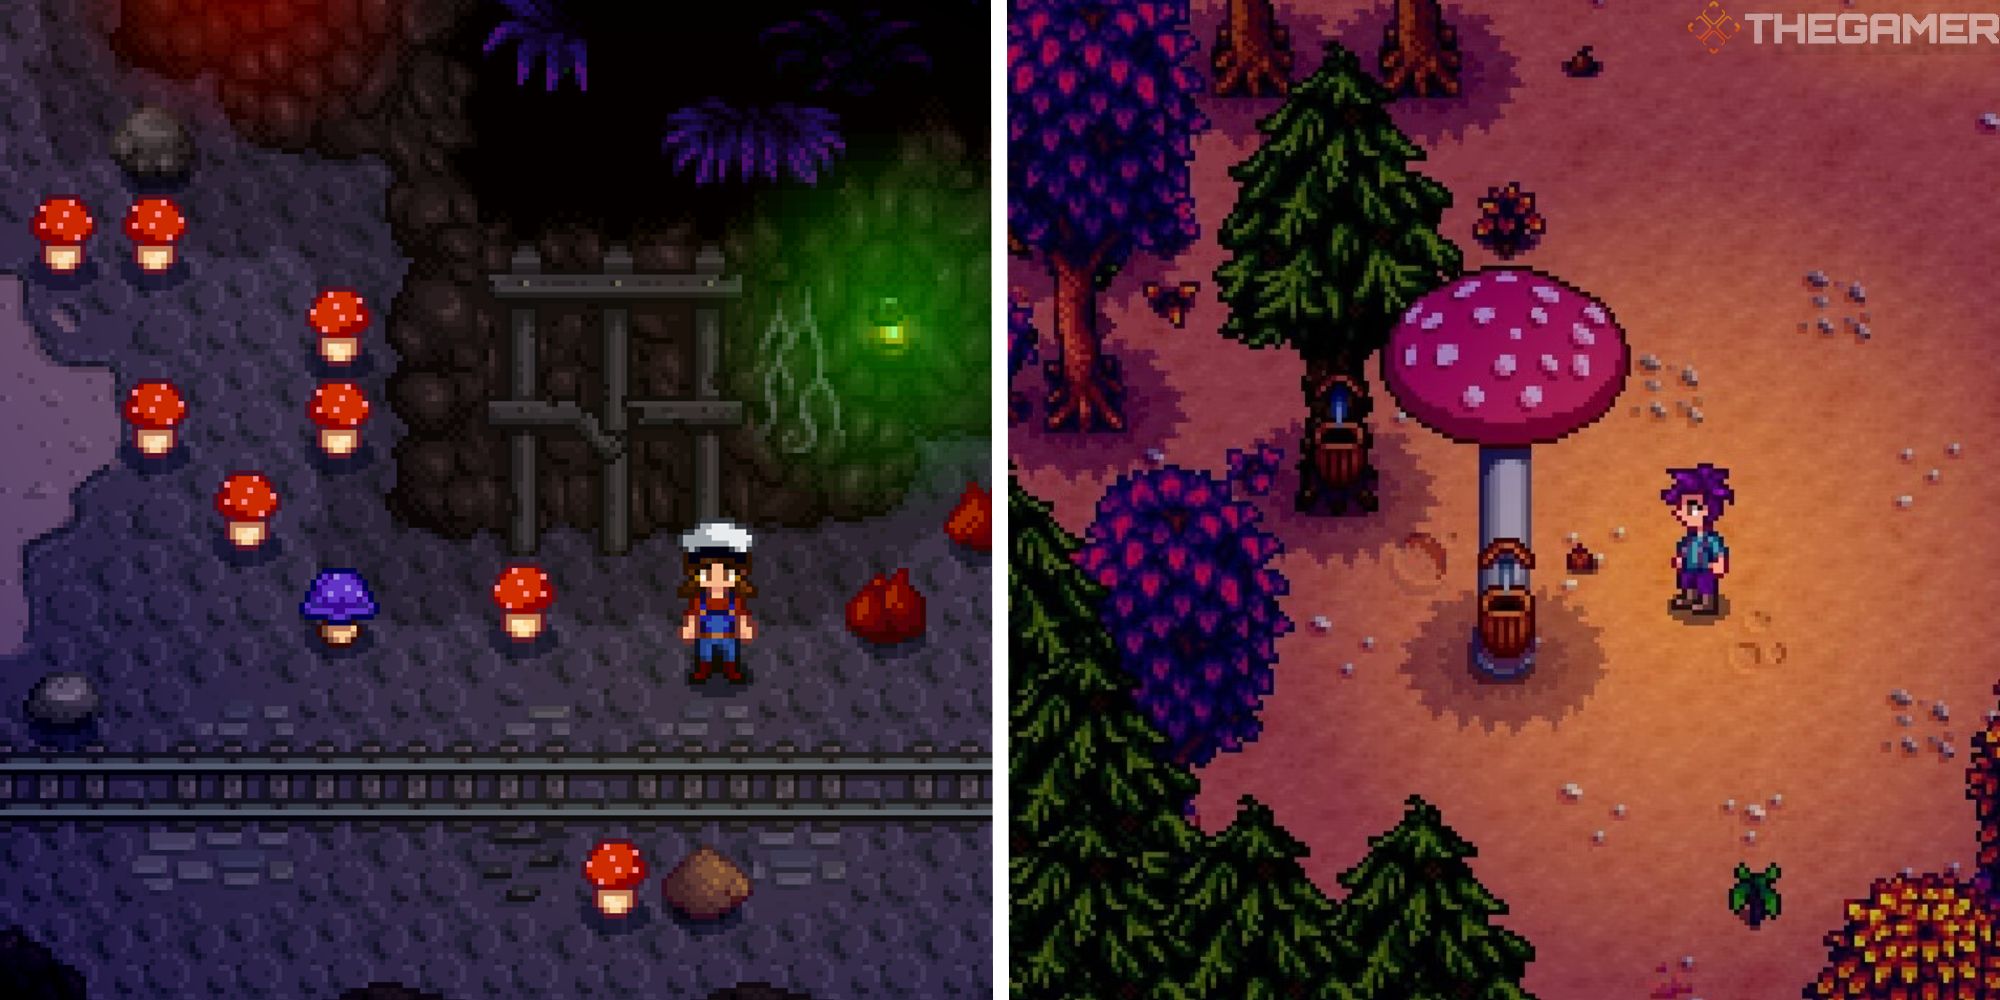 stardew valley mushroom guide split image showing player in mines with mushrooms next to image of player near a mushroom tree with a tapper